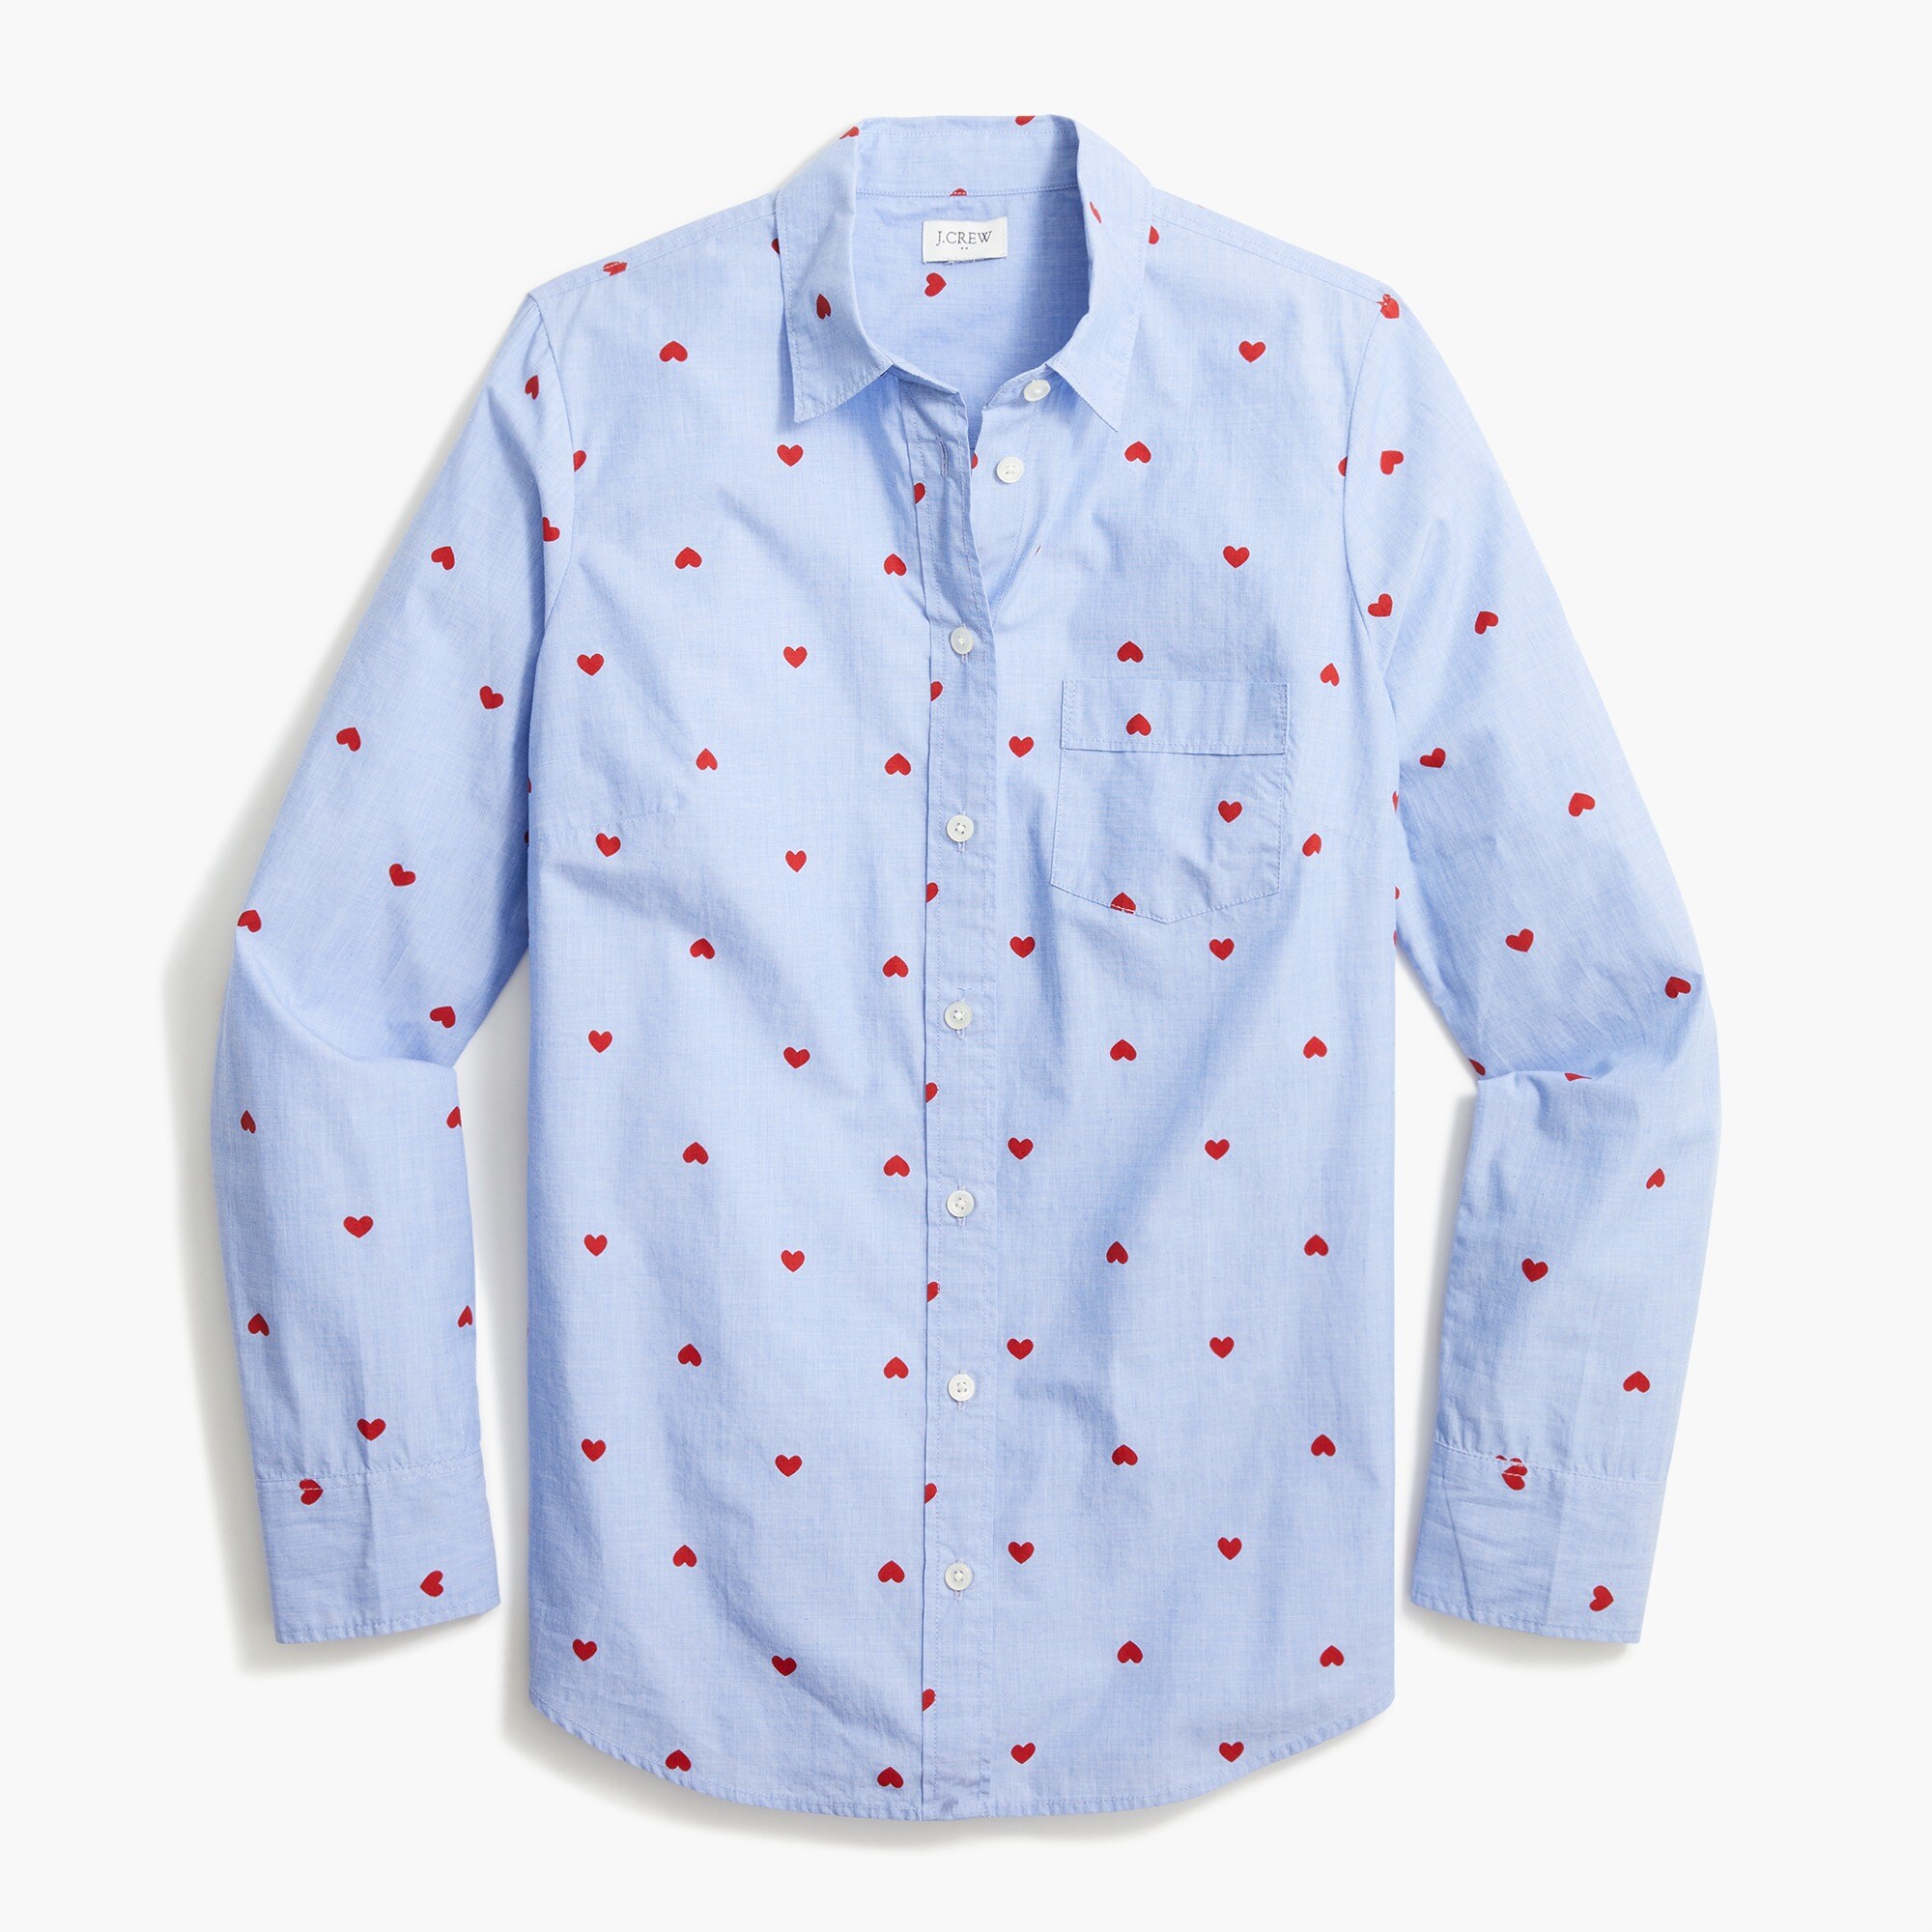  Printed button-up shirt in end-on-end cotton